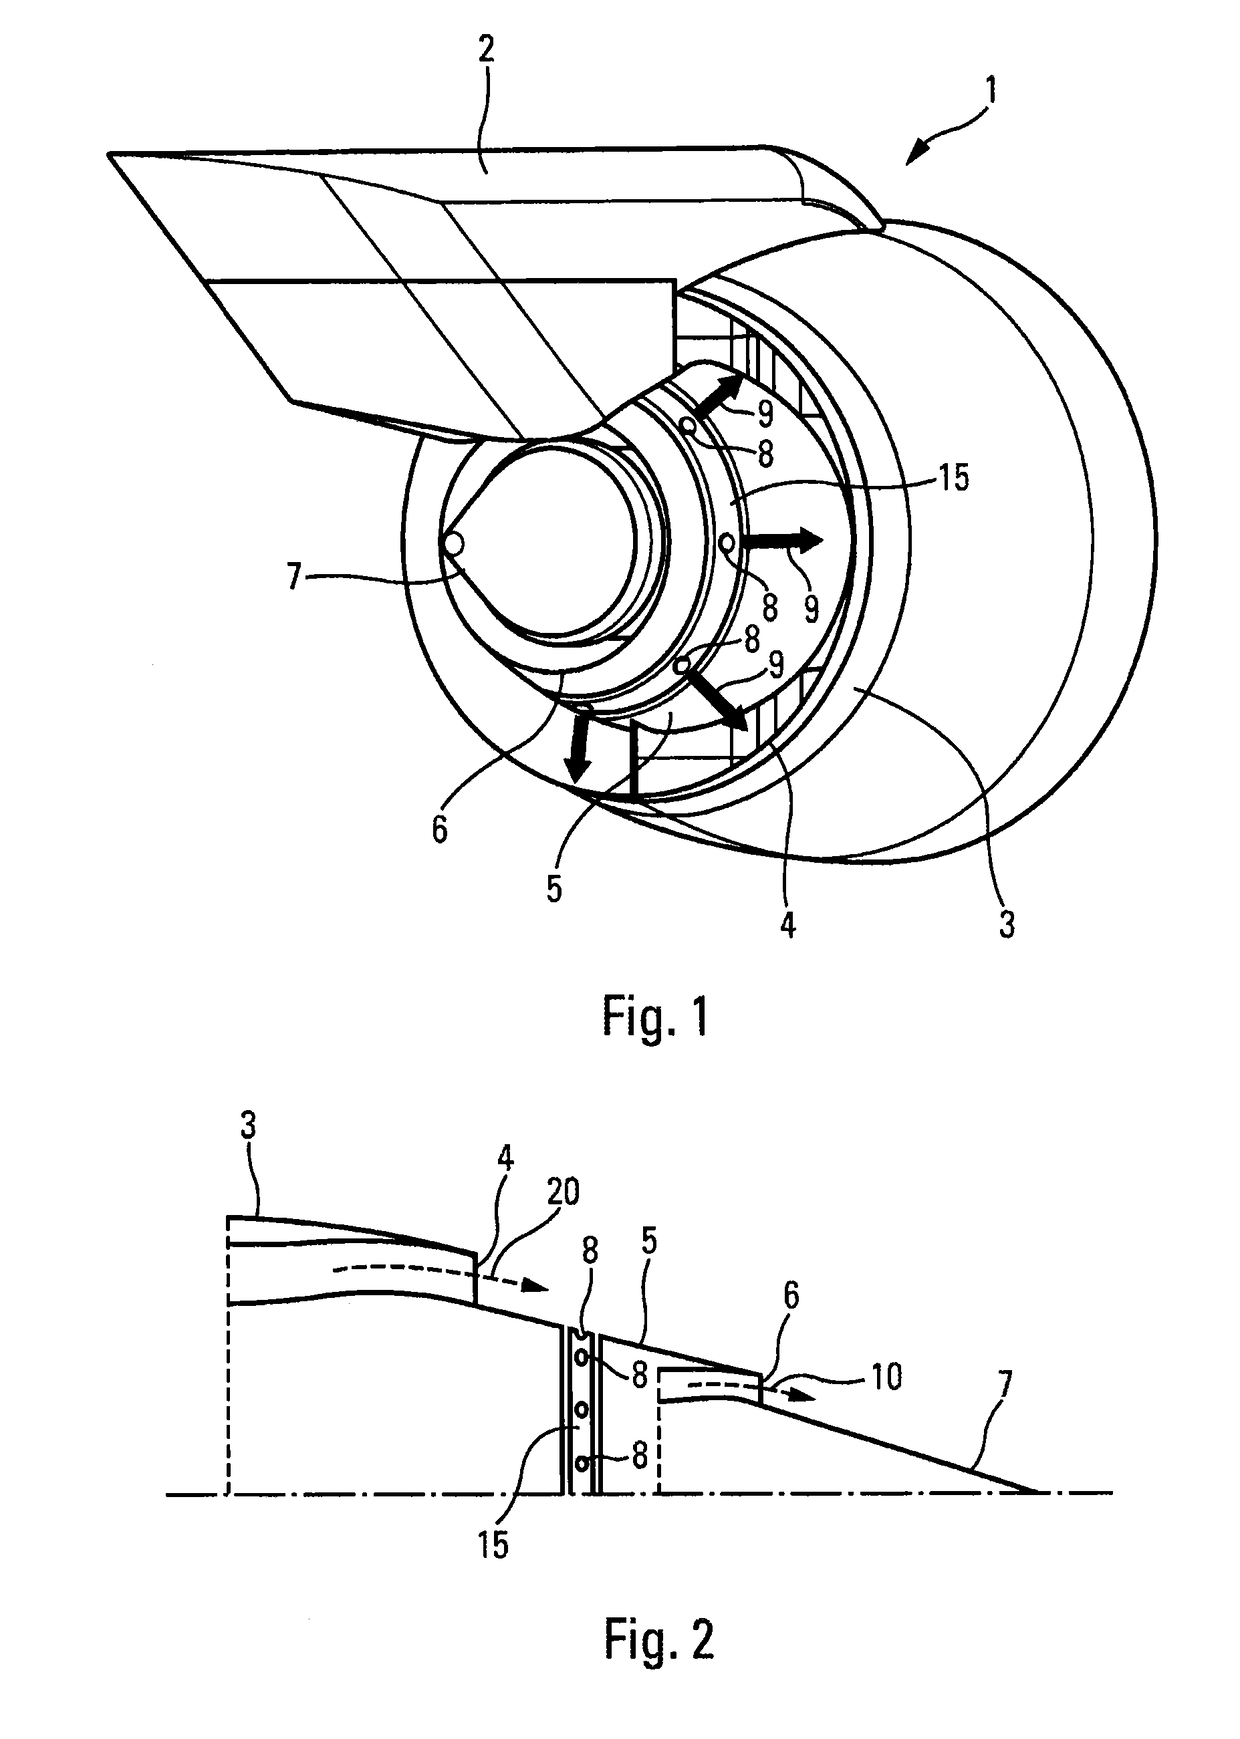 Primary cowl of a turbofan comprising a rotating ring having micro-jets